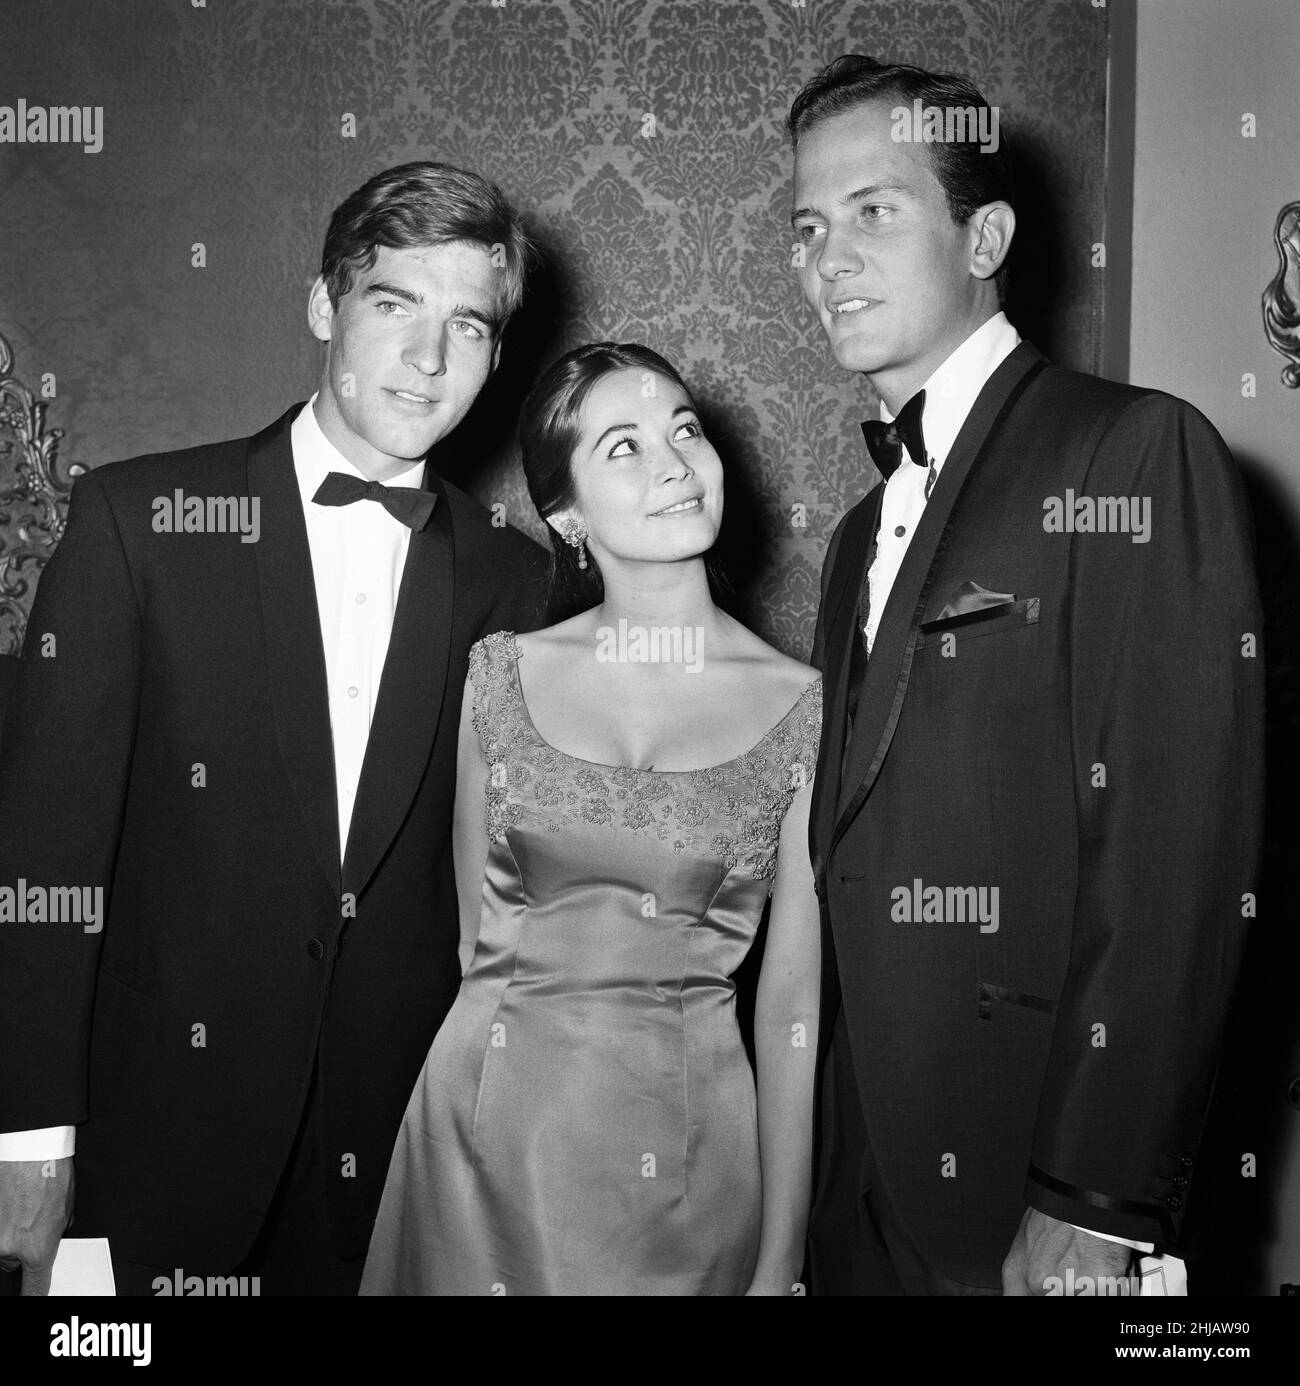 The world premier of  'The Main Attraction' at the Plaza, Piccadilly, which stars Pat Boone and Nancy Kwan. Pictured, guest, Nancy Kwan and Pat Boone and  at premier. 25th October 1962. Stock Photo